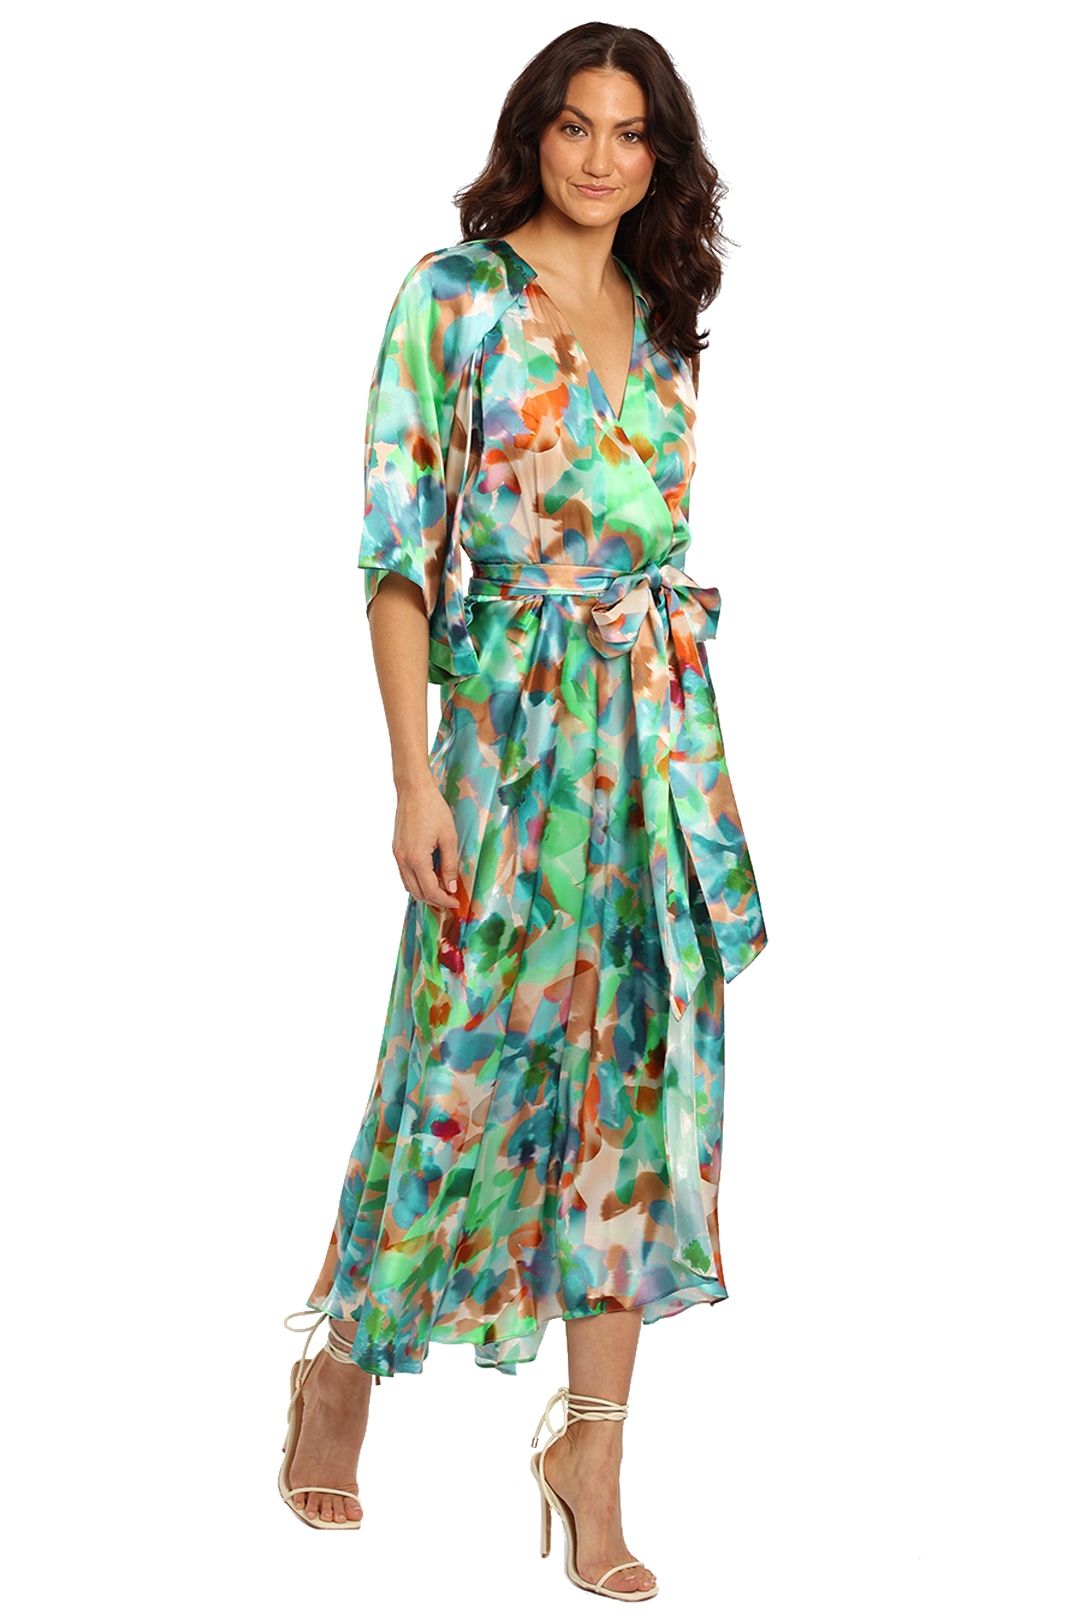 Ginger and Smart Beautiful Truth Wrap Dress maxi